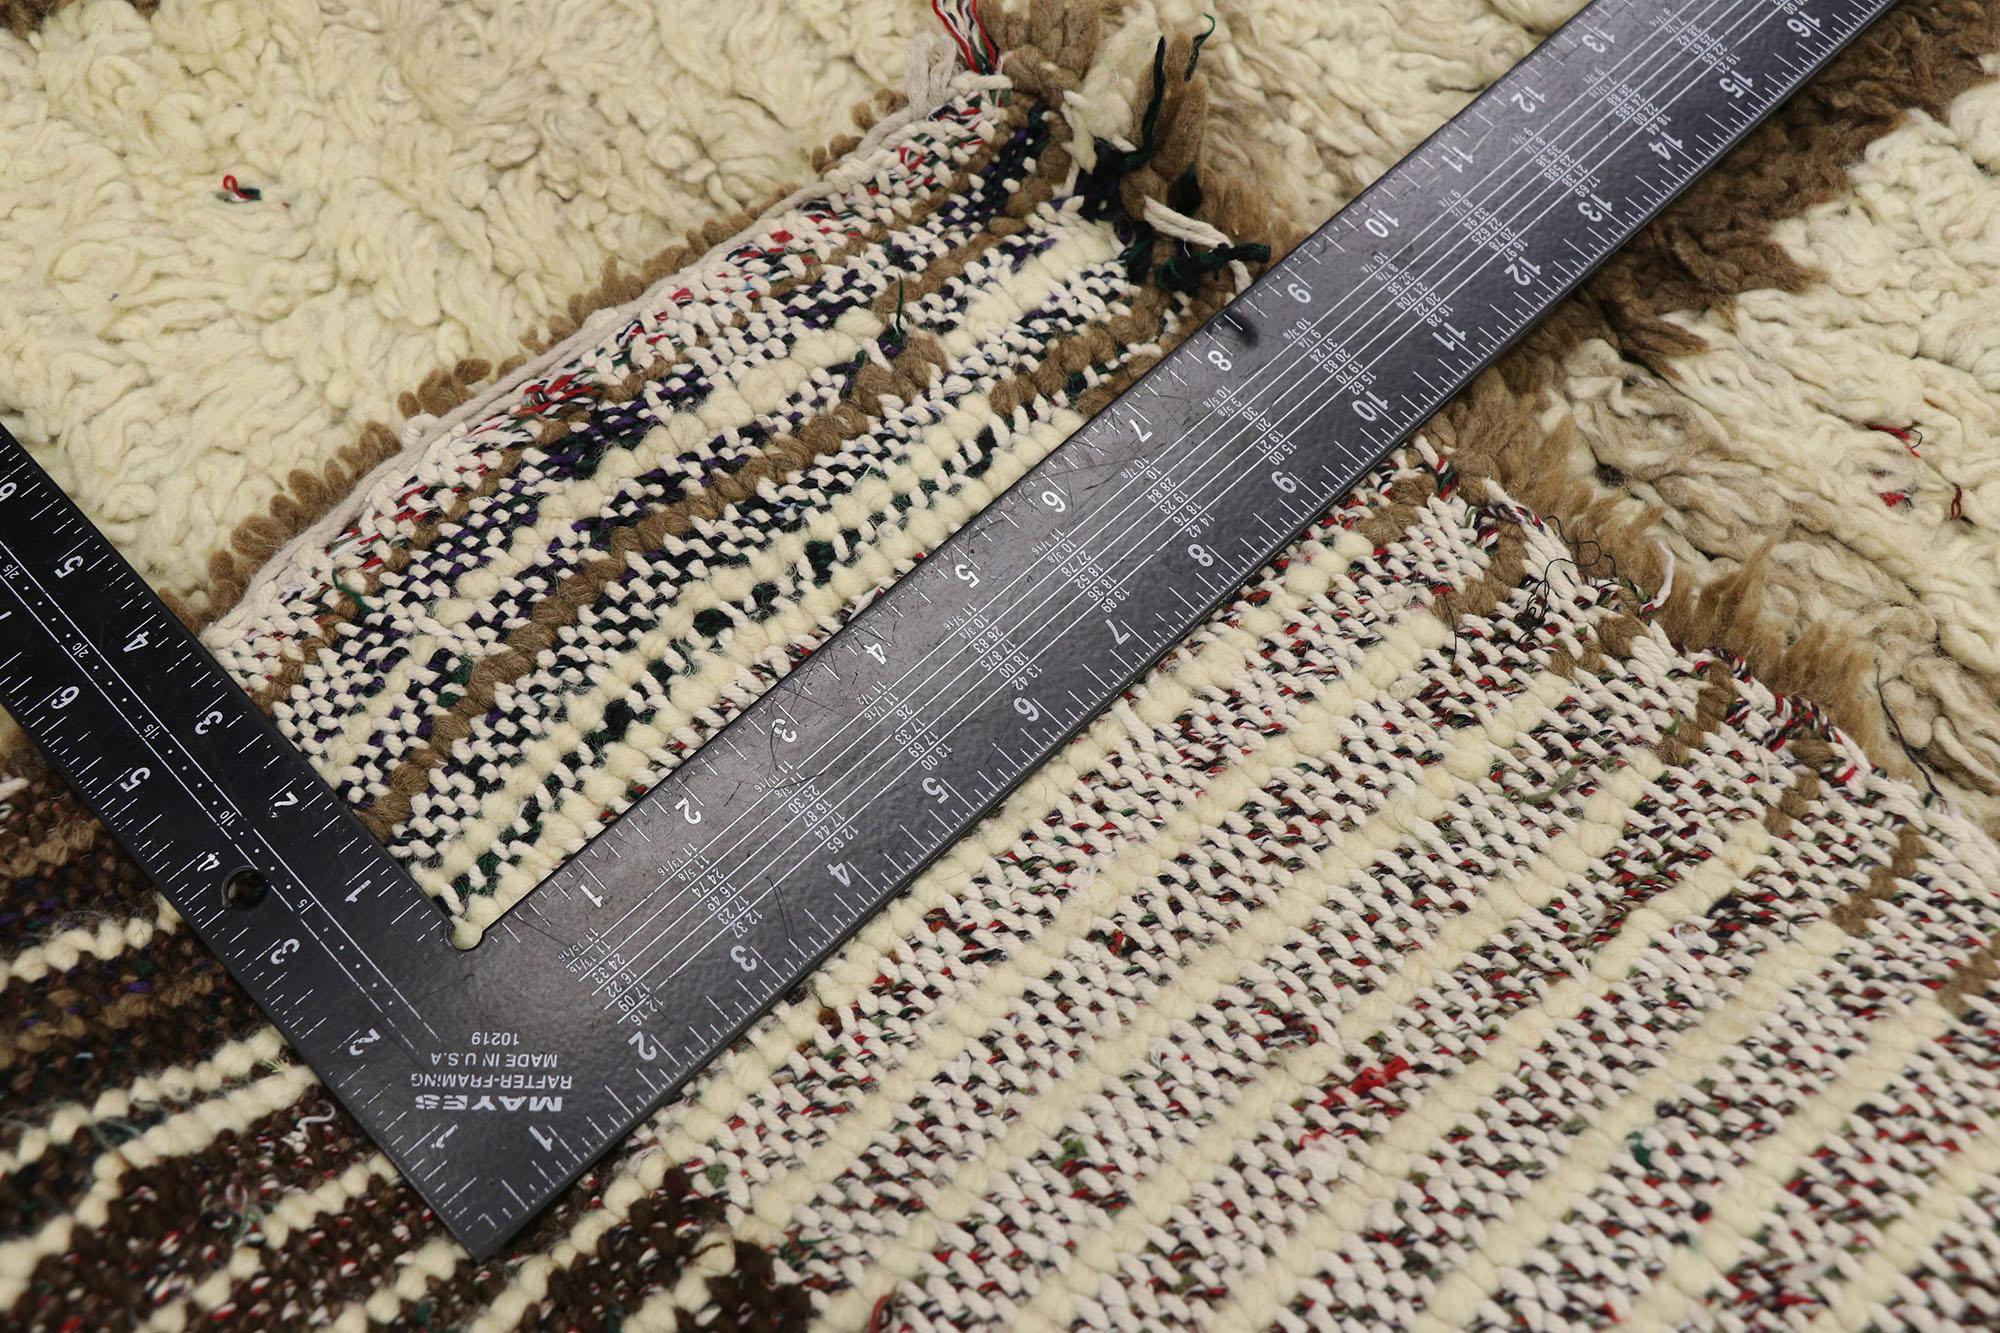 Vintage Berber Moroccan Azilal Rug with Mid-Century Modern Style In Good Condition For Sale In Dallas, TX